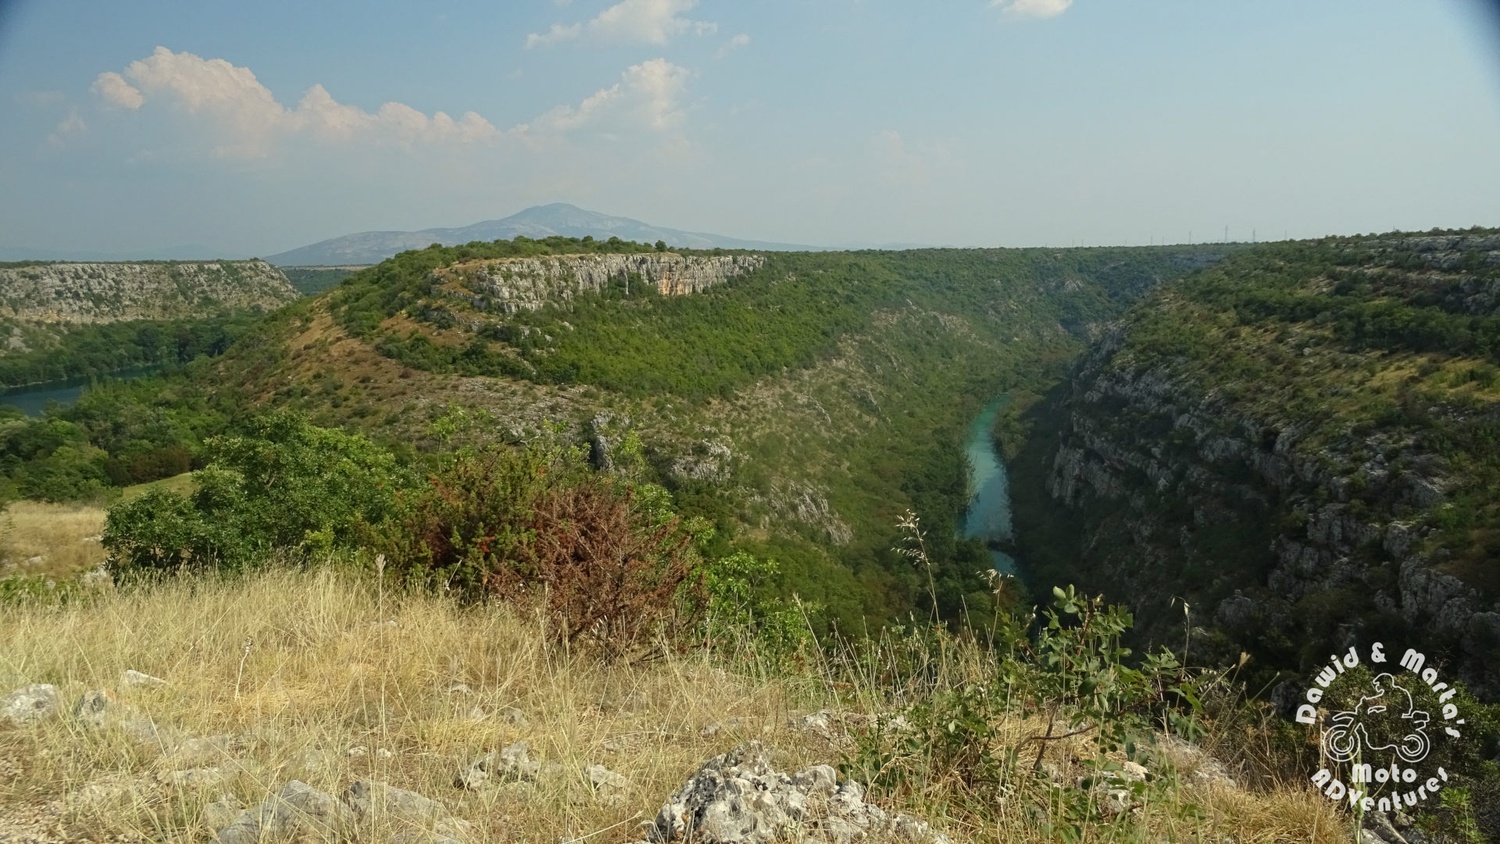 The Krk River canyon